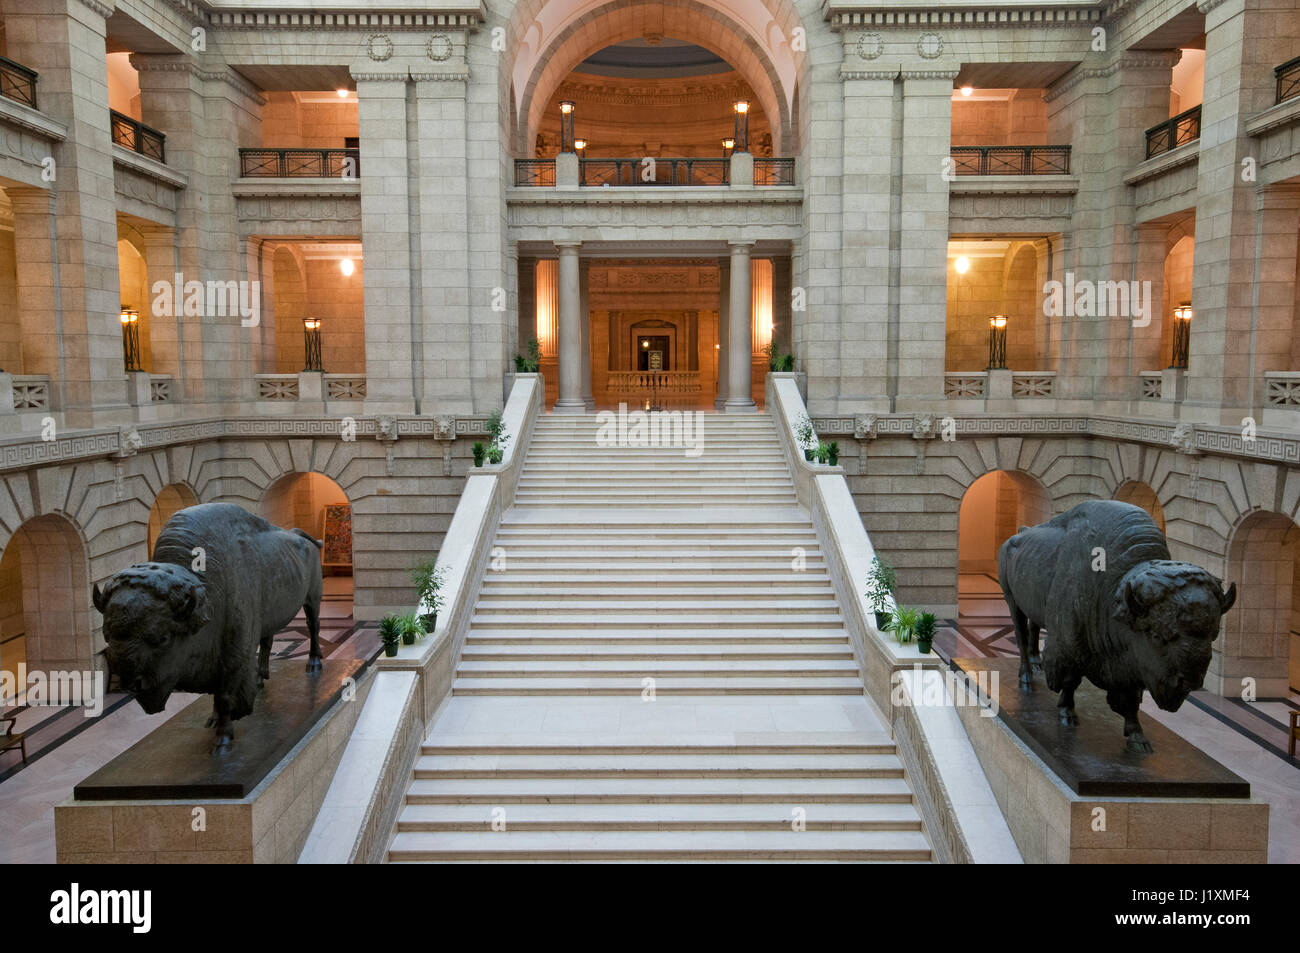 Interior of the Legislative Building with staircase and bronze sculptures of american bison (Bison bison), Winnipeg, Manitoba, Canada Stock Photo